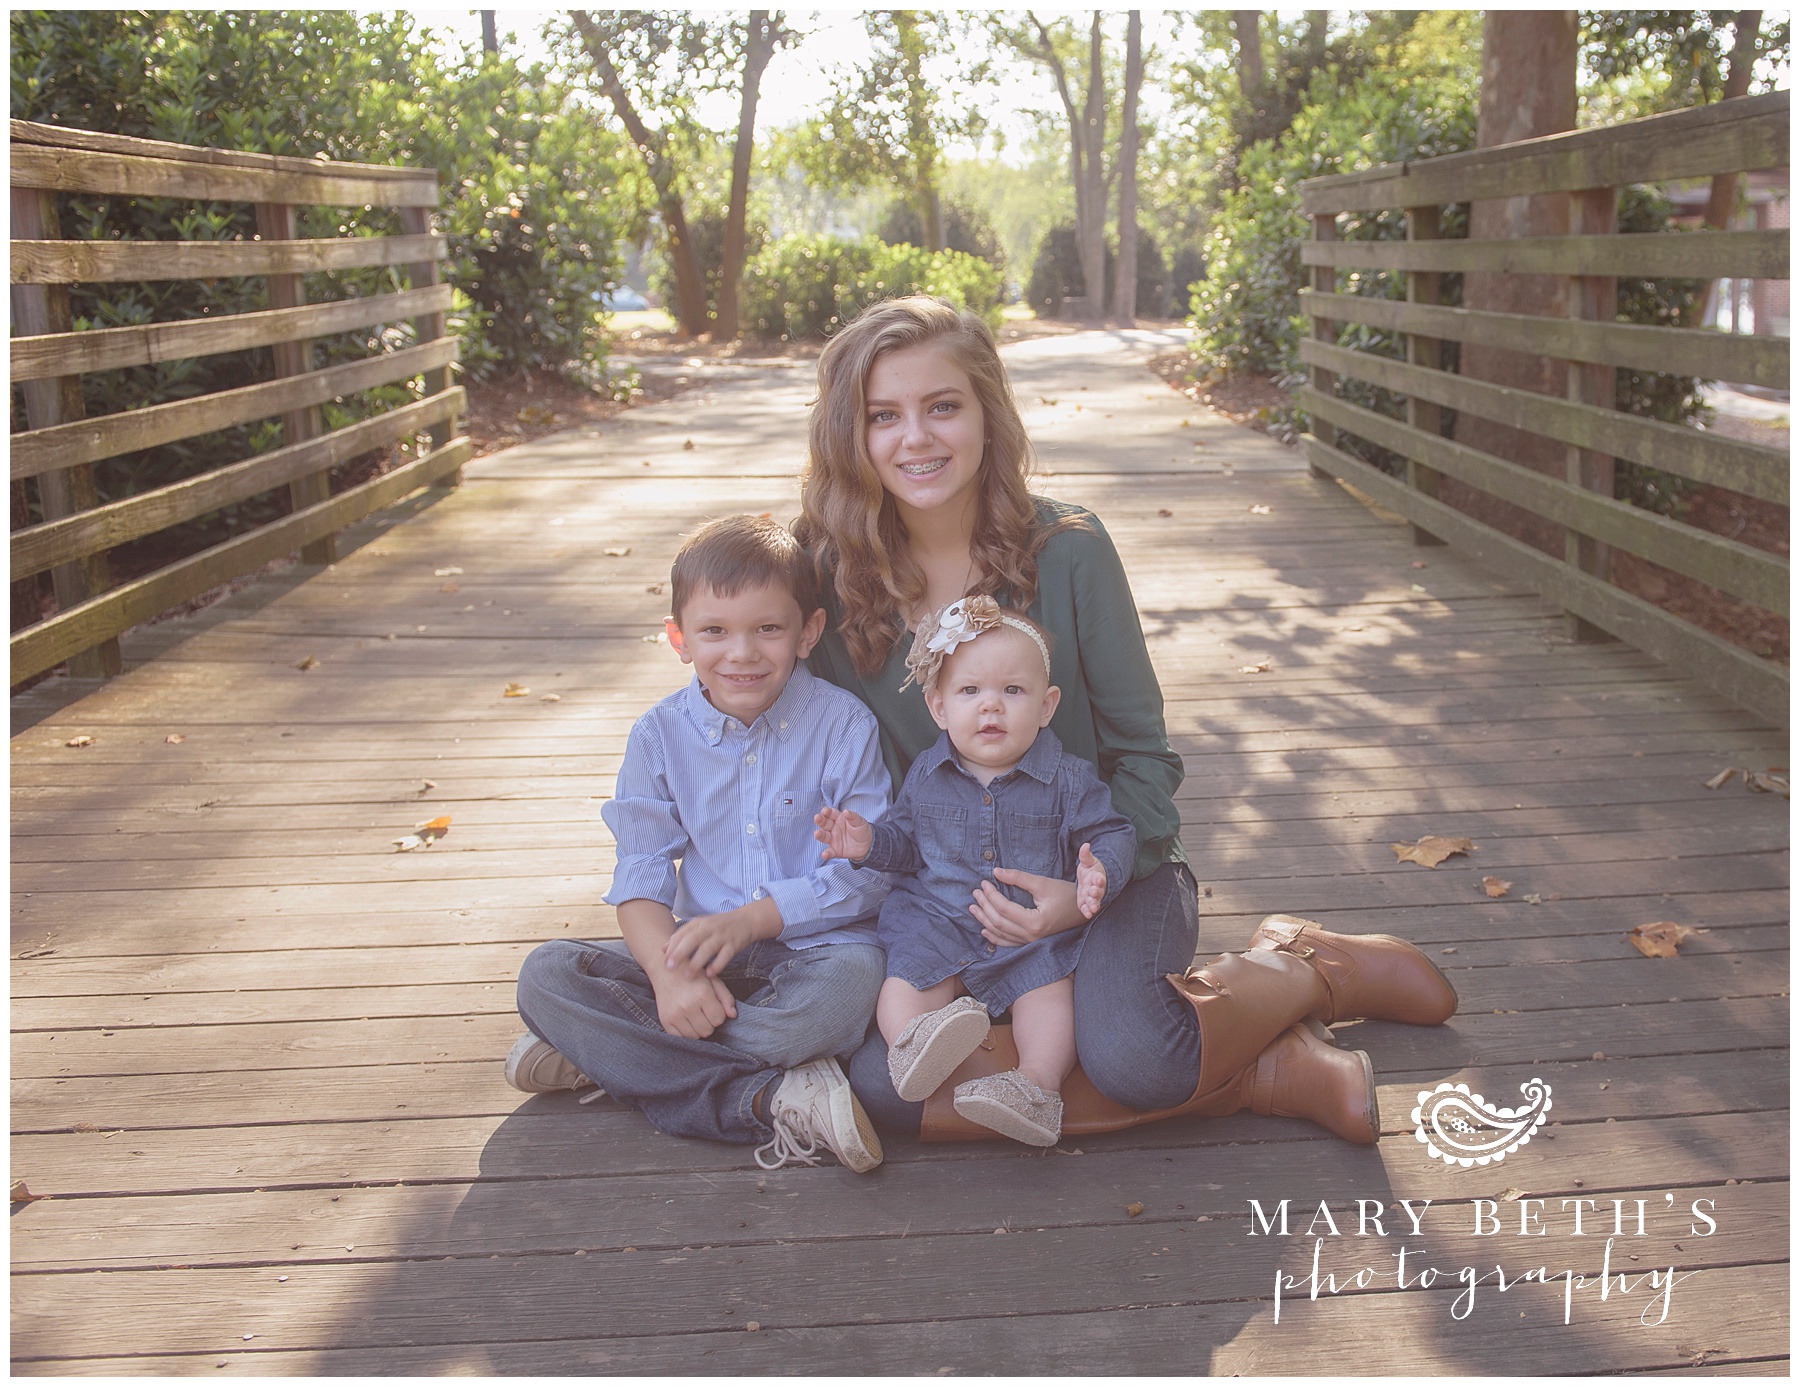 MaryBeths Photography - North Augusta Family and Newborn Session Photographer_0004.jpg